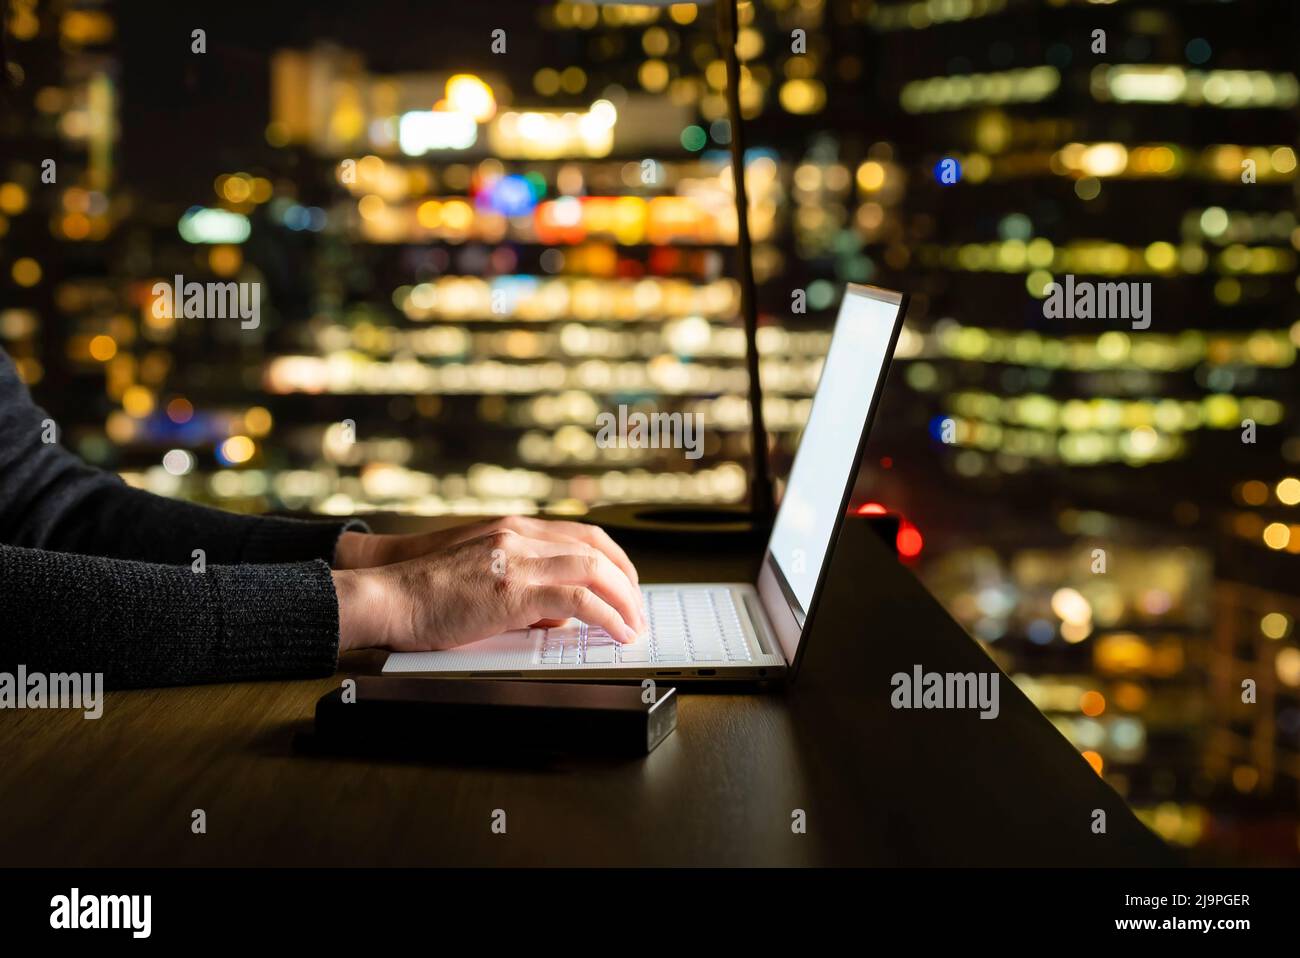 Working with computer at night, out focus city skyline background Stock Photo